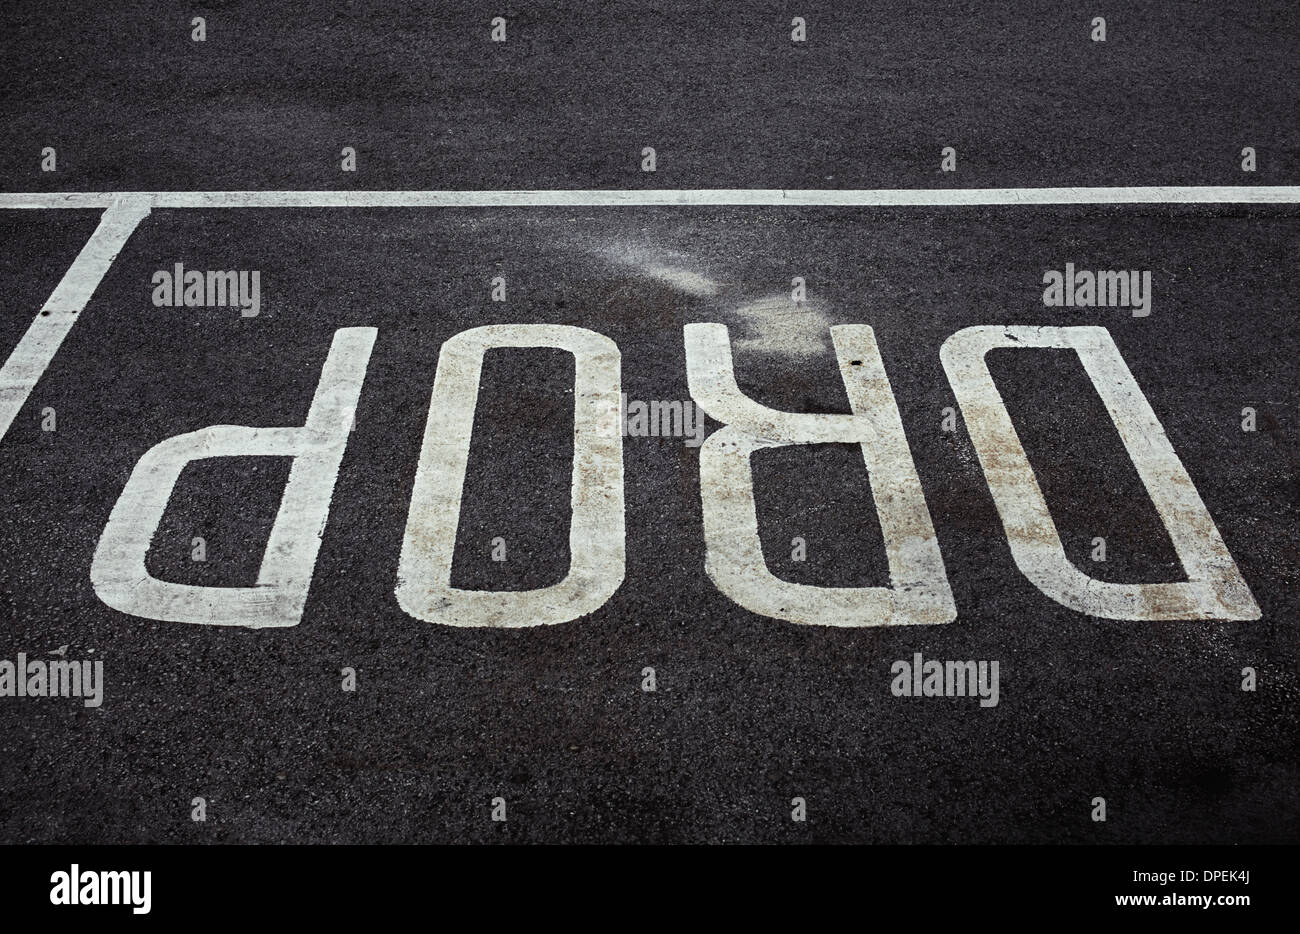 DROP word painted on road Stock Photo